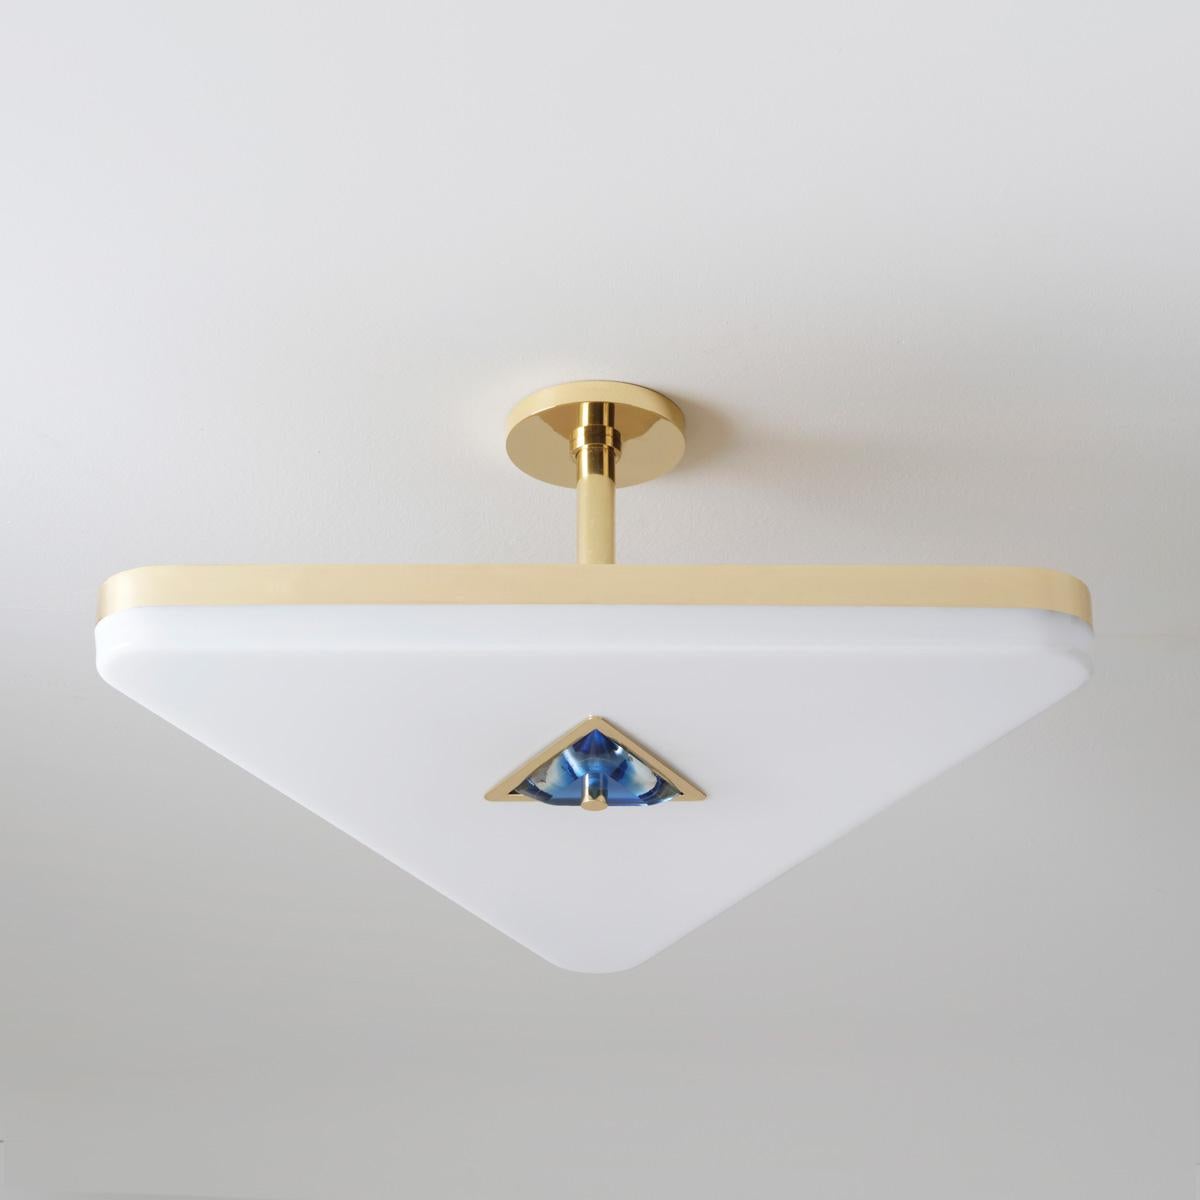 Modern Iris Triangle Ceiling Light by Gaspare Asaro. Polished Brass Finish For Sale